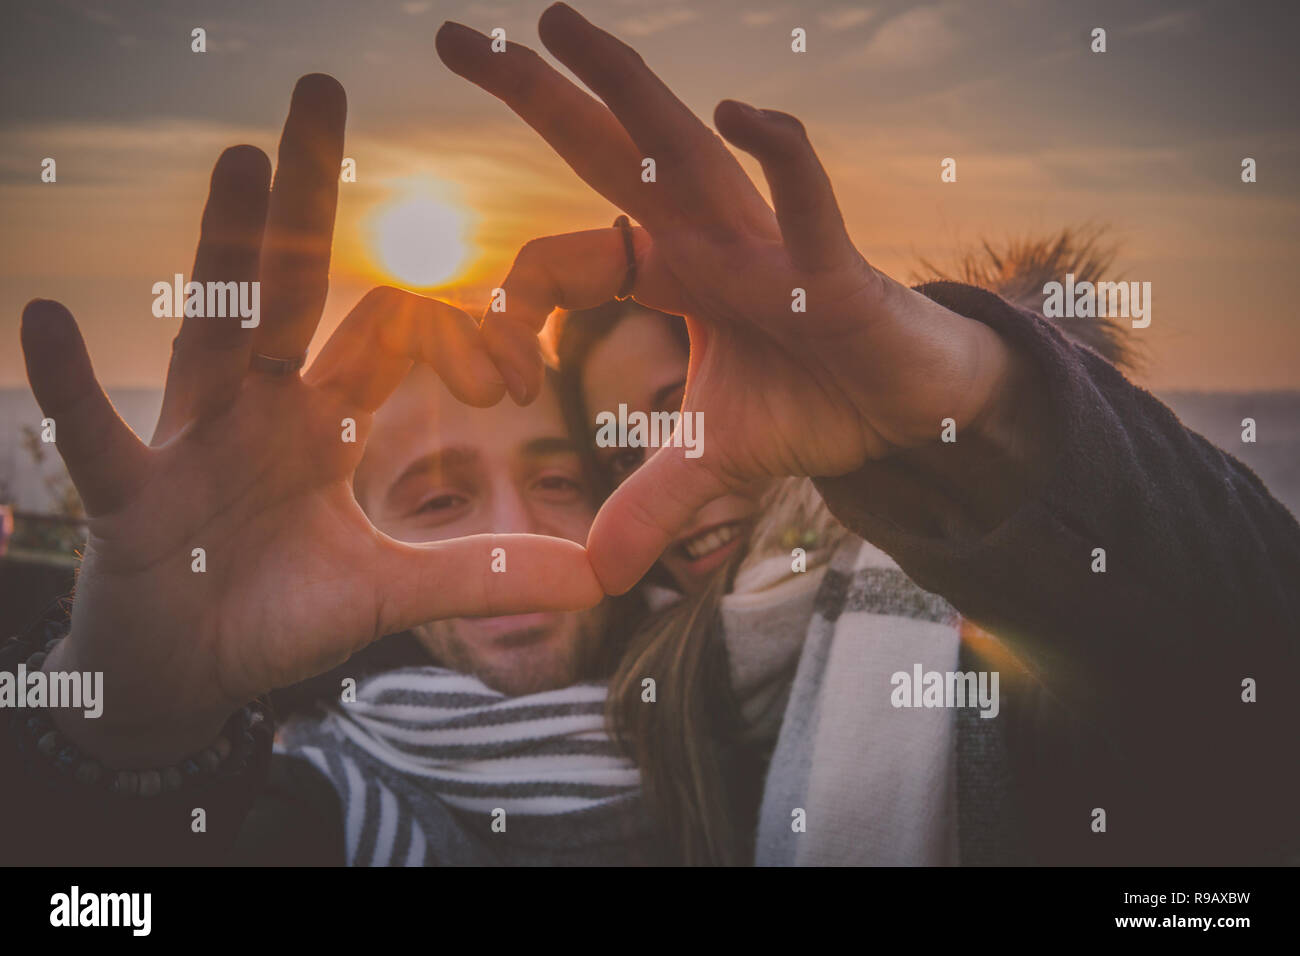 Young couple in love making heart shape with hands in the sunset moment Stock Photo